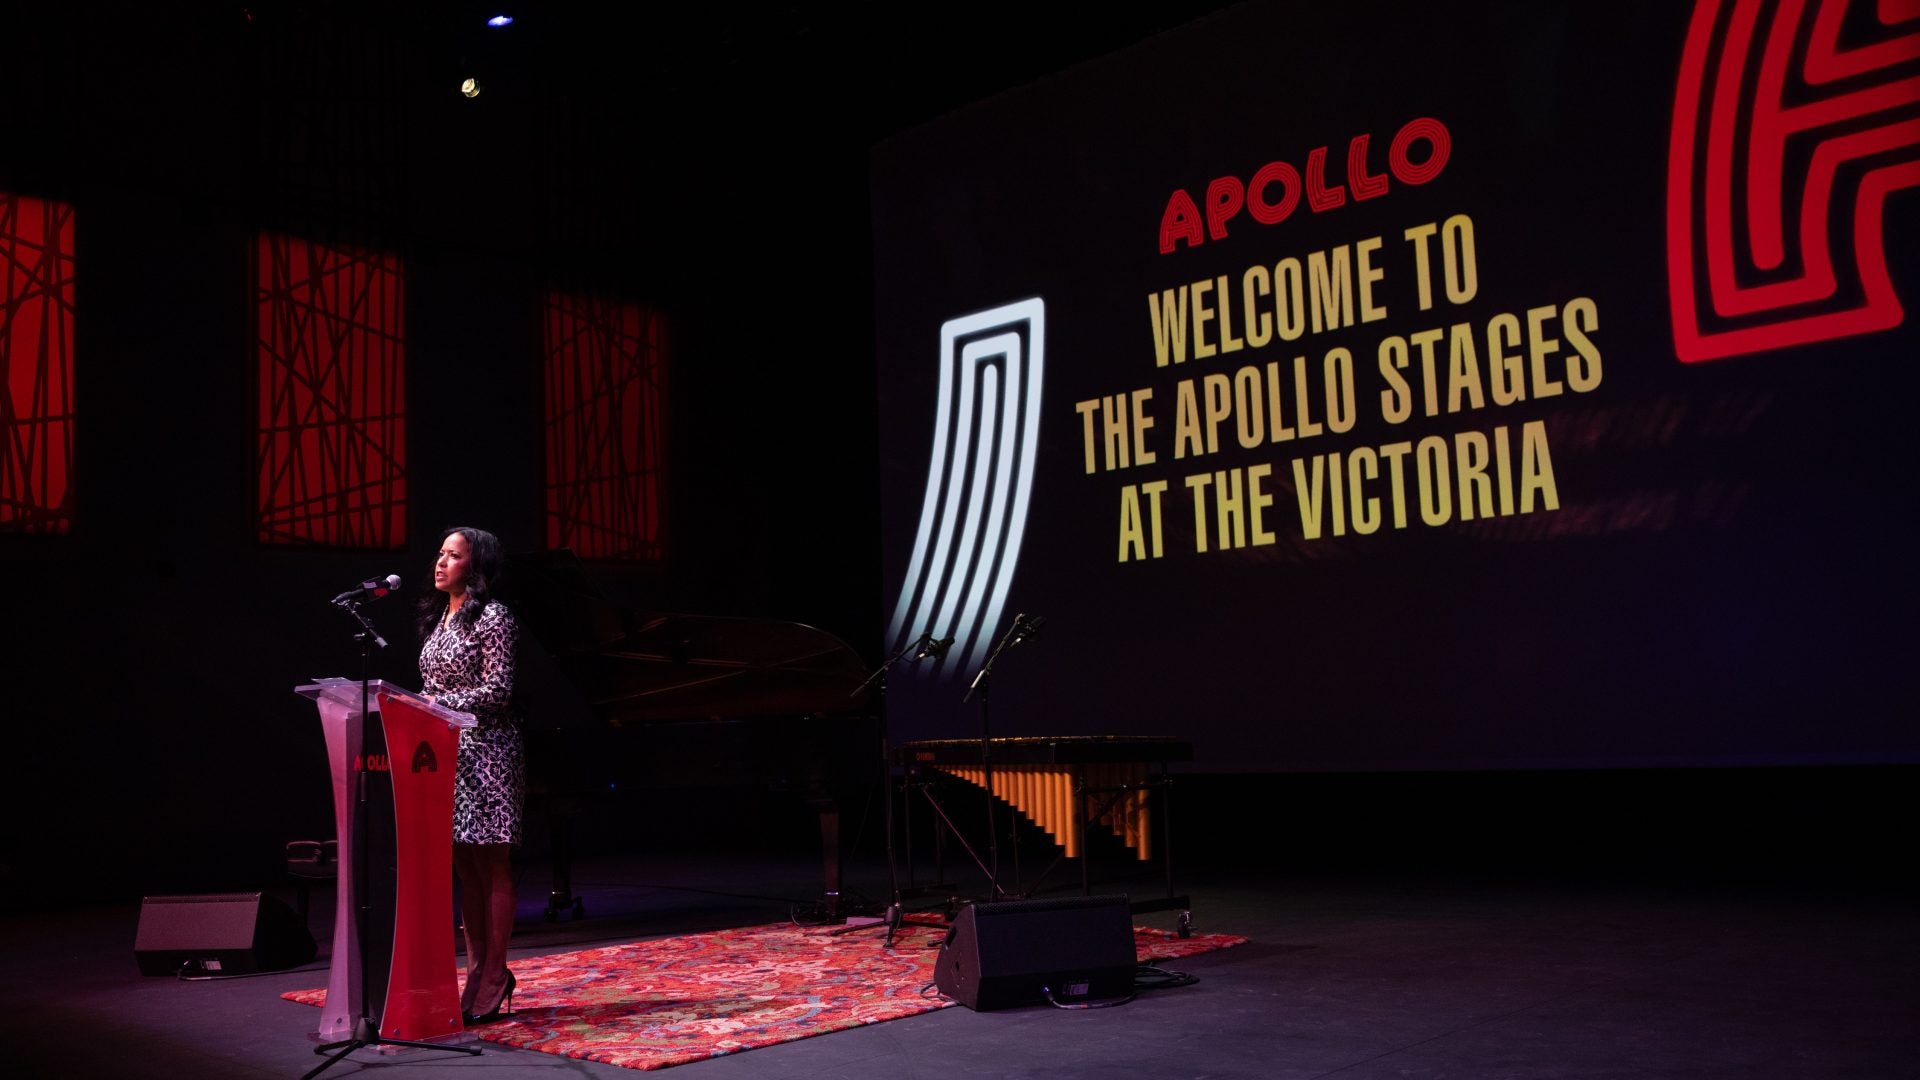 The Apollo Unveils Expansion To Harlem's Victoria Theater